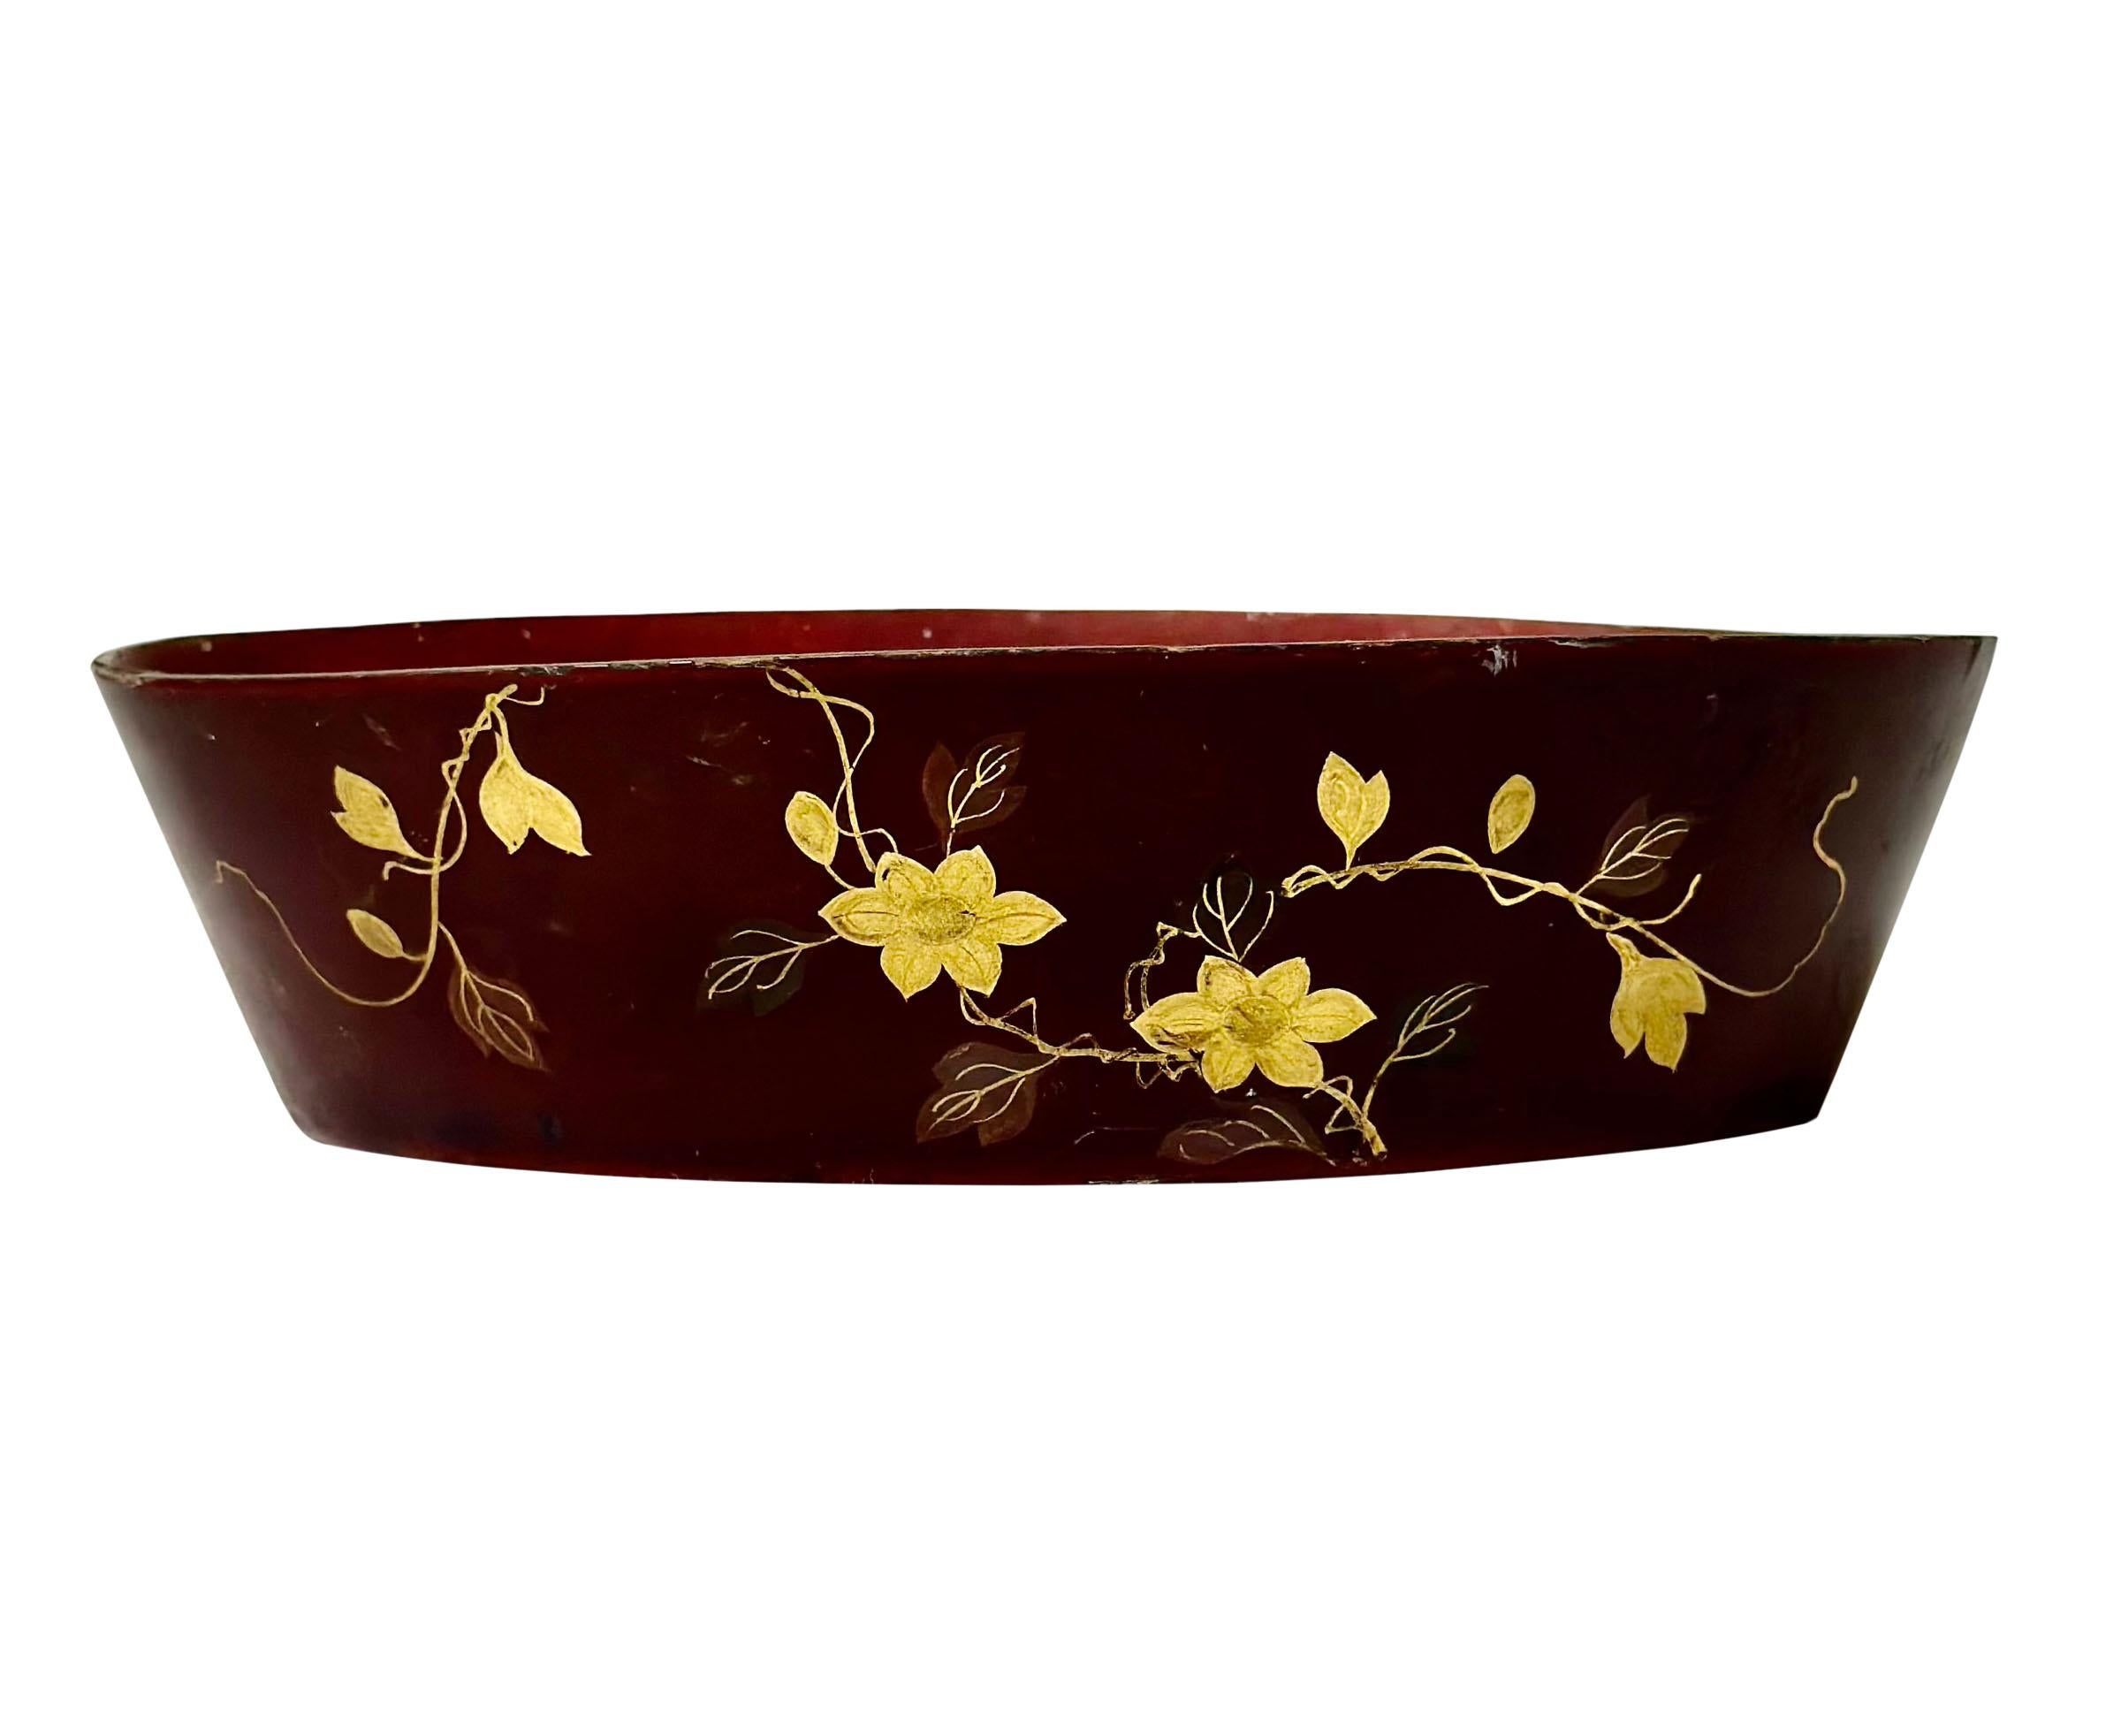 A small Chinese export, papier mâché planter or dish with a gold flower design. It is circa early 19th century.